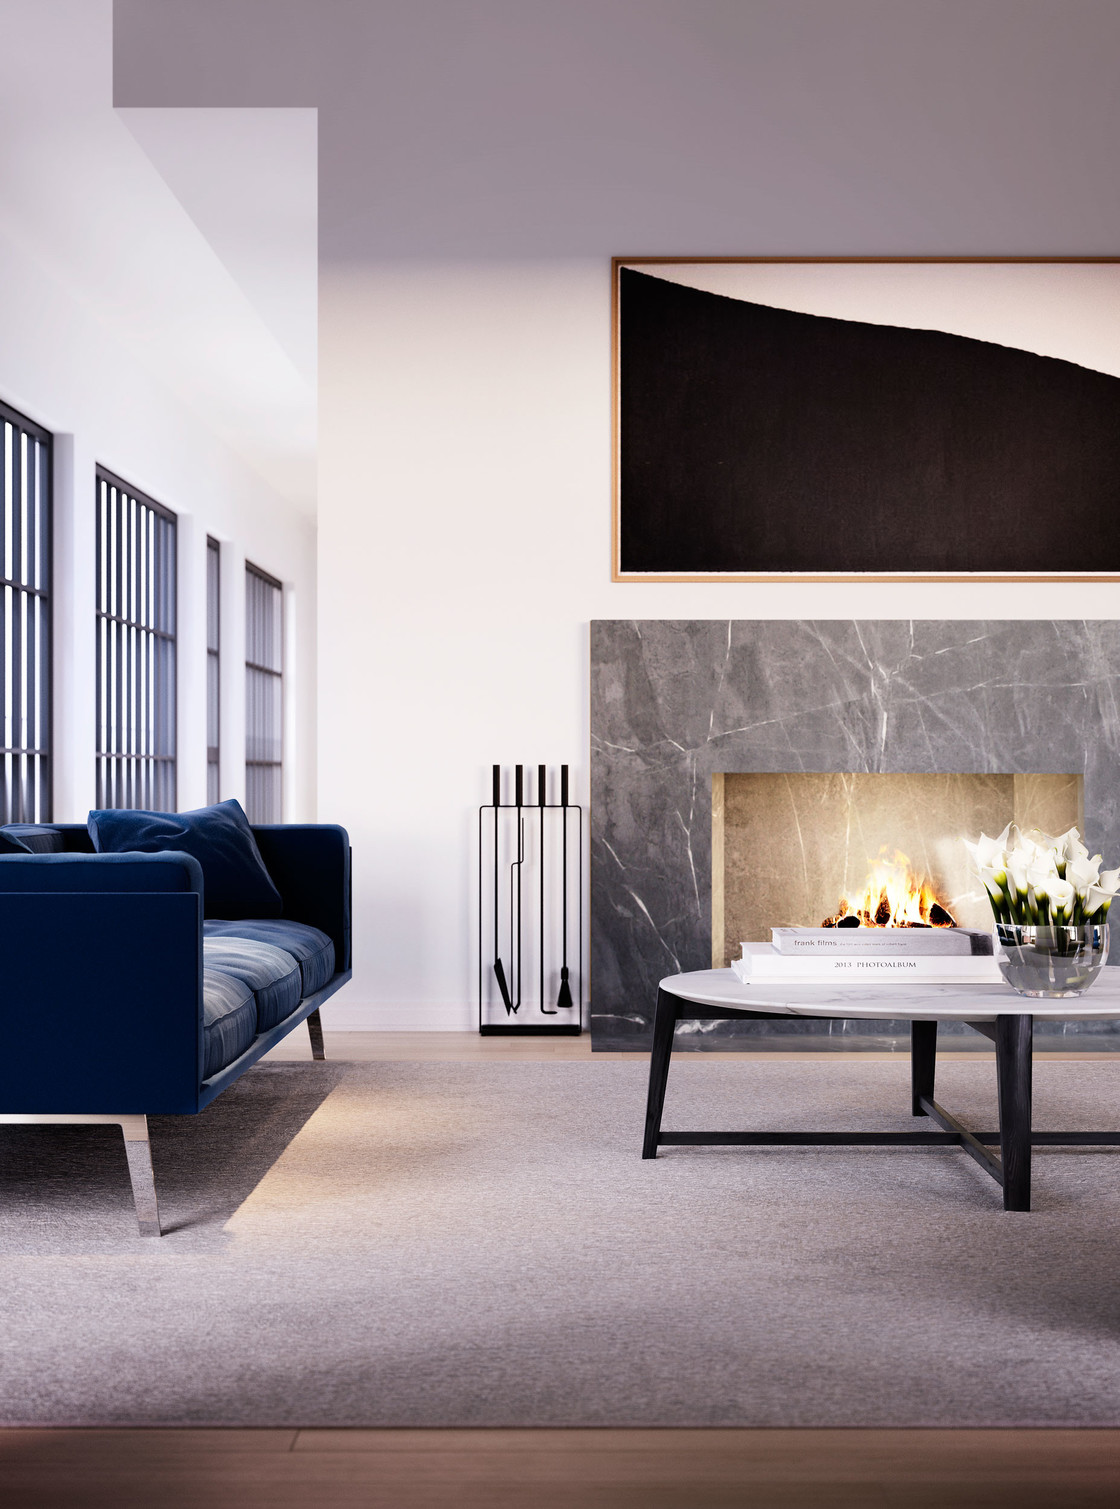 The penthouse’s spacious living room is a great place to gather in all seasons. The room is anchored by a modern fireplace that becomes the focal point during the colder months. And in the summer, the nearby terrace doors can be opened to welcome fresh air and light.